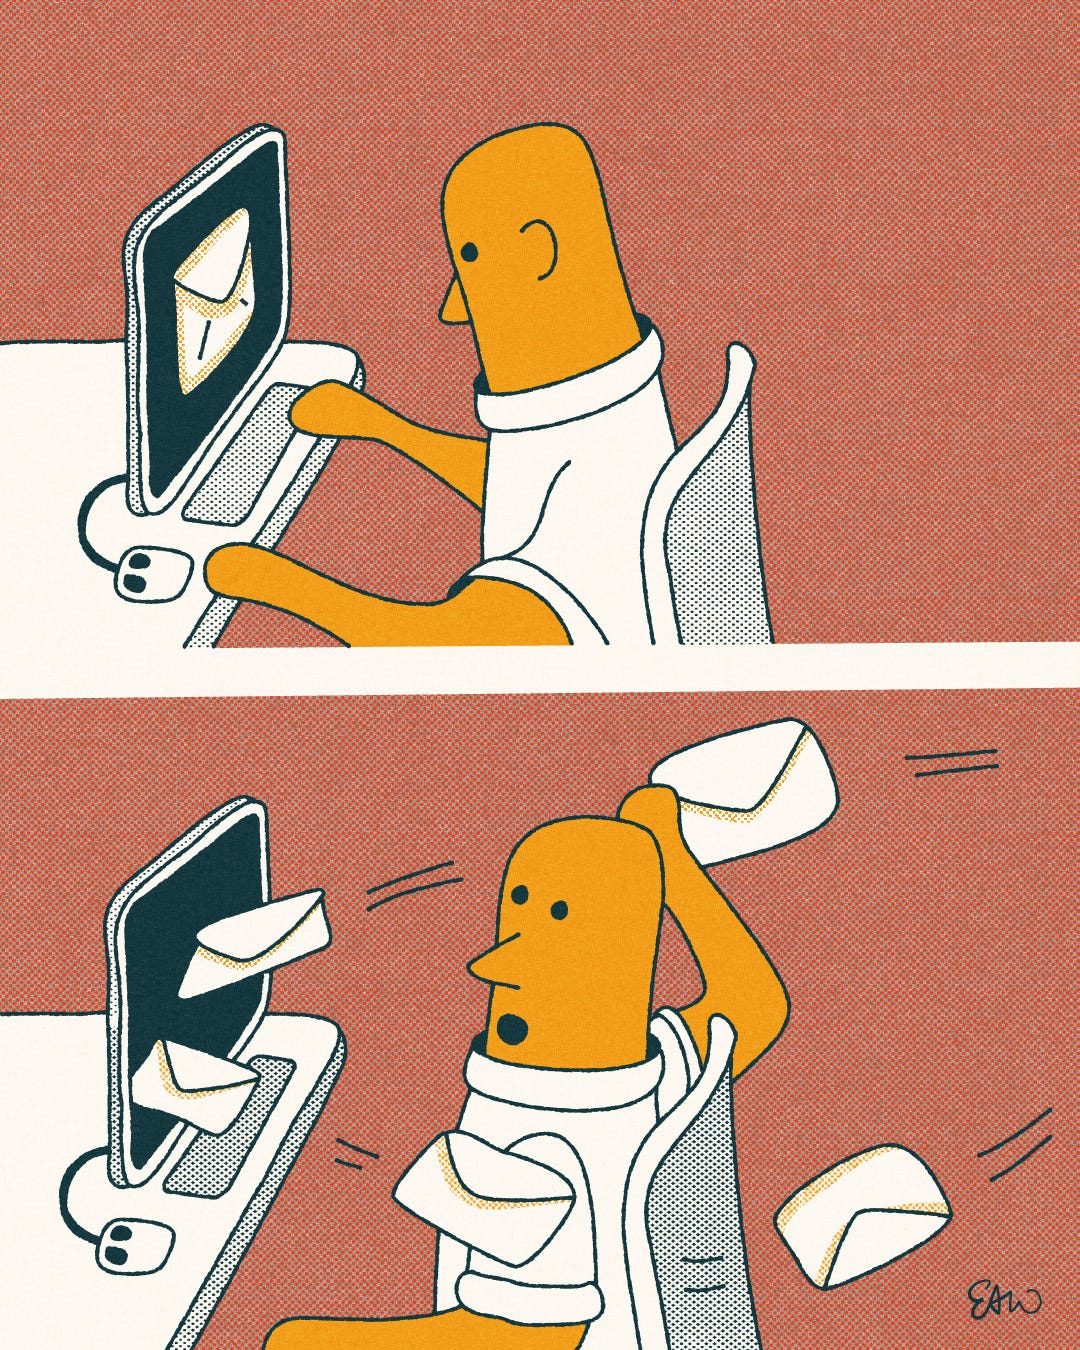 Panels one and two of a four panel comic drawn in a retro style showing a character sitting in front of a computer. On the screen is the image a single envelope indicating new email. Then in the next panel, multiple envelopes start physically flying out of the computer.